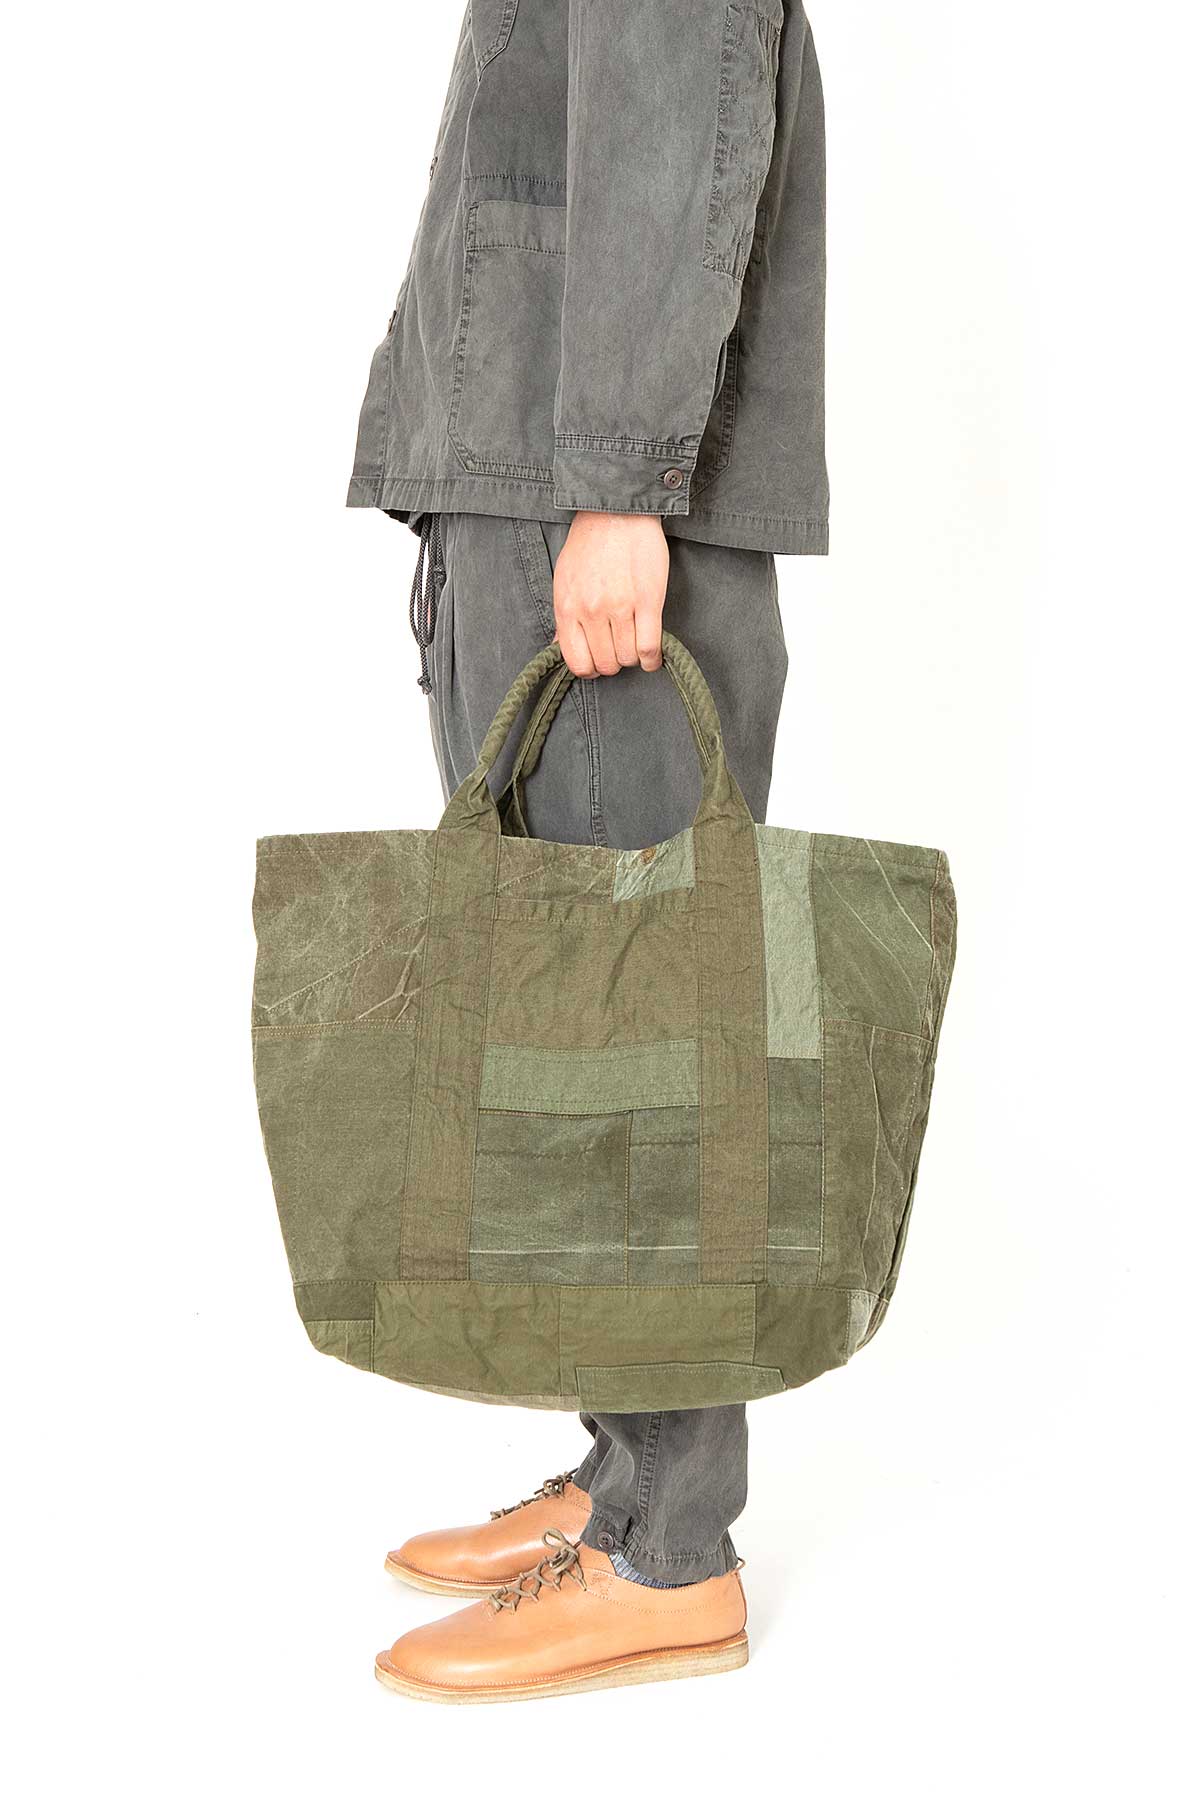 CARRY-ALL TOTE L UPCYCLED US ARMY CLOTH | hobo